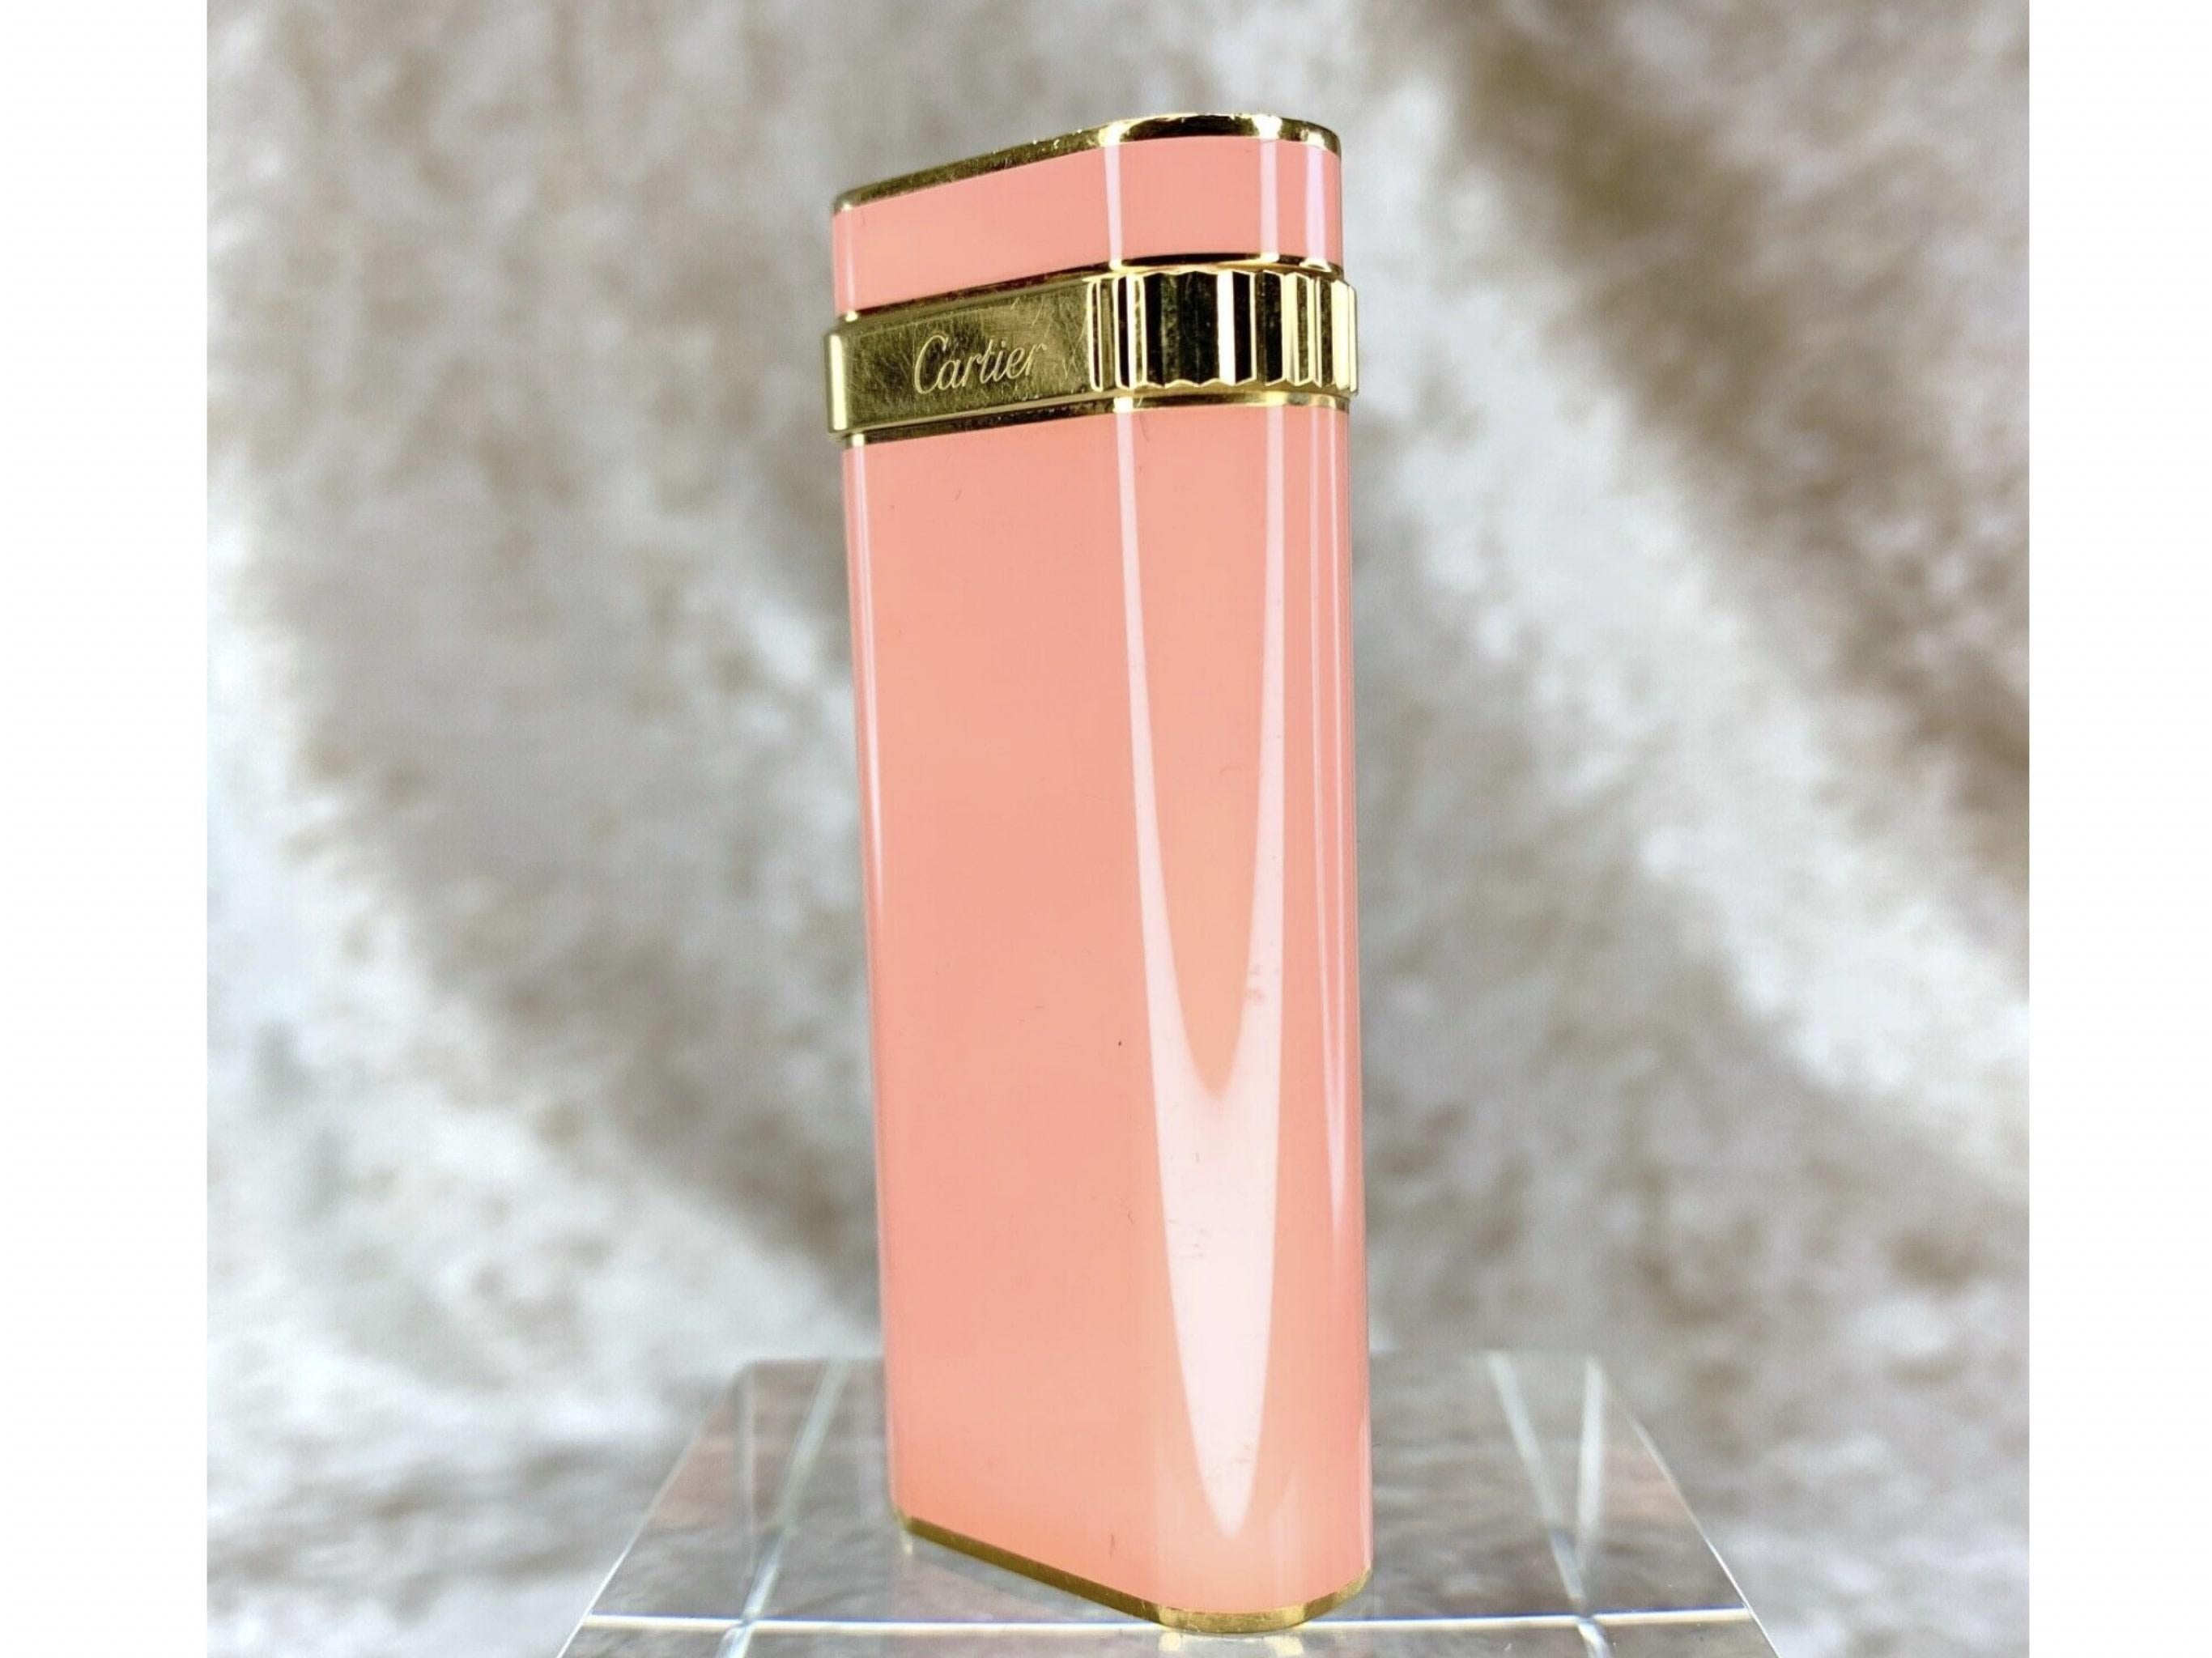 Le Must de Cartier, Very Rare, Candy Pink Lacquer & Gold Lighter 2